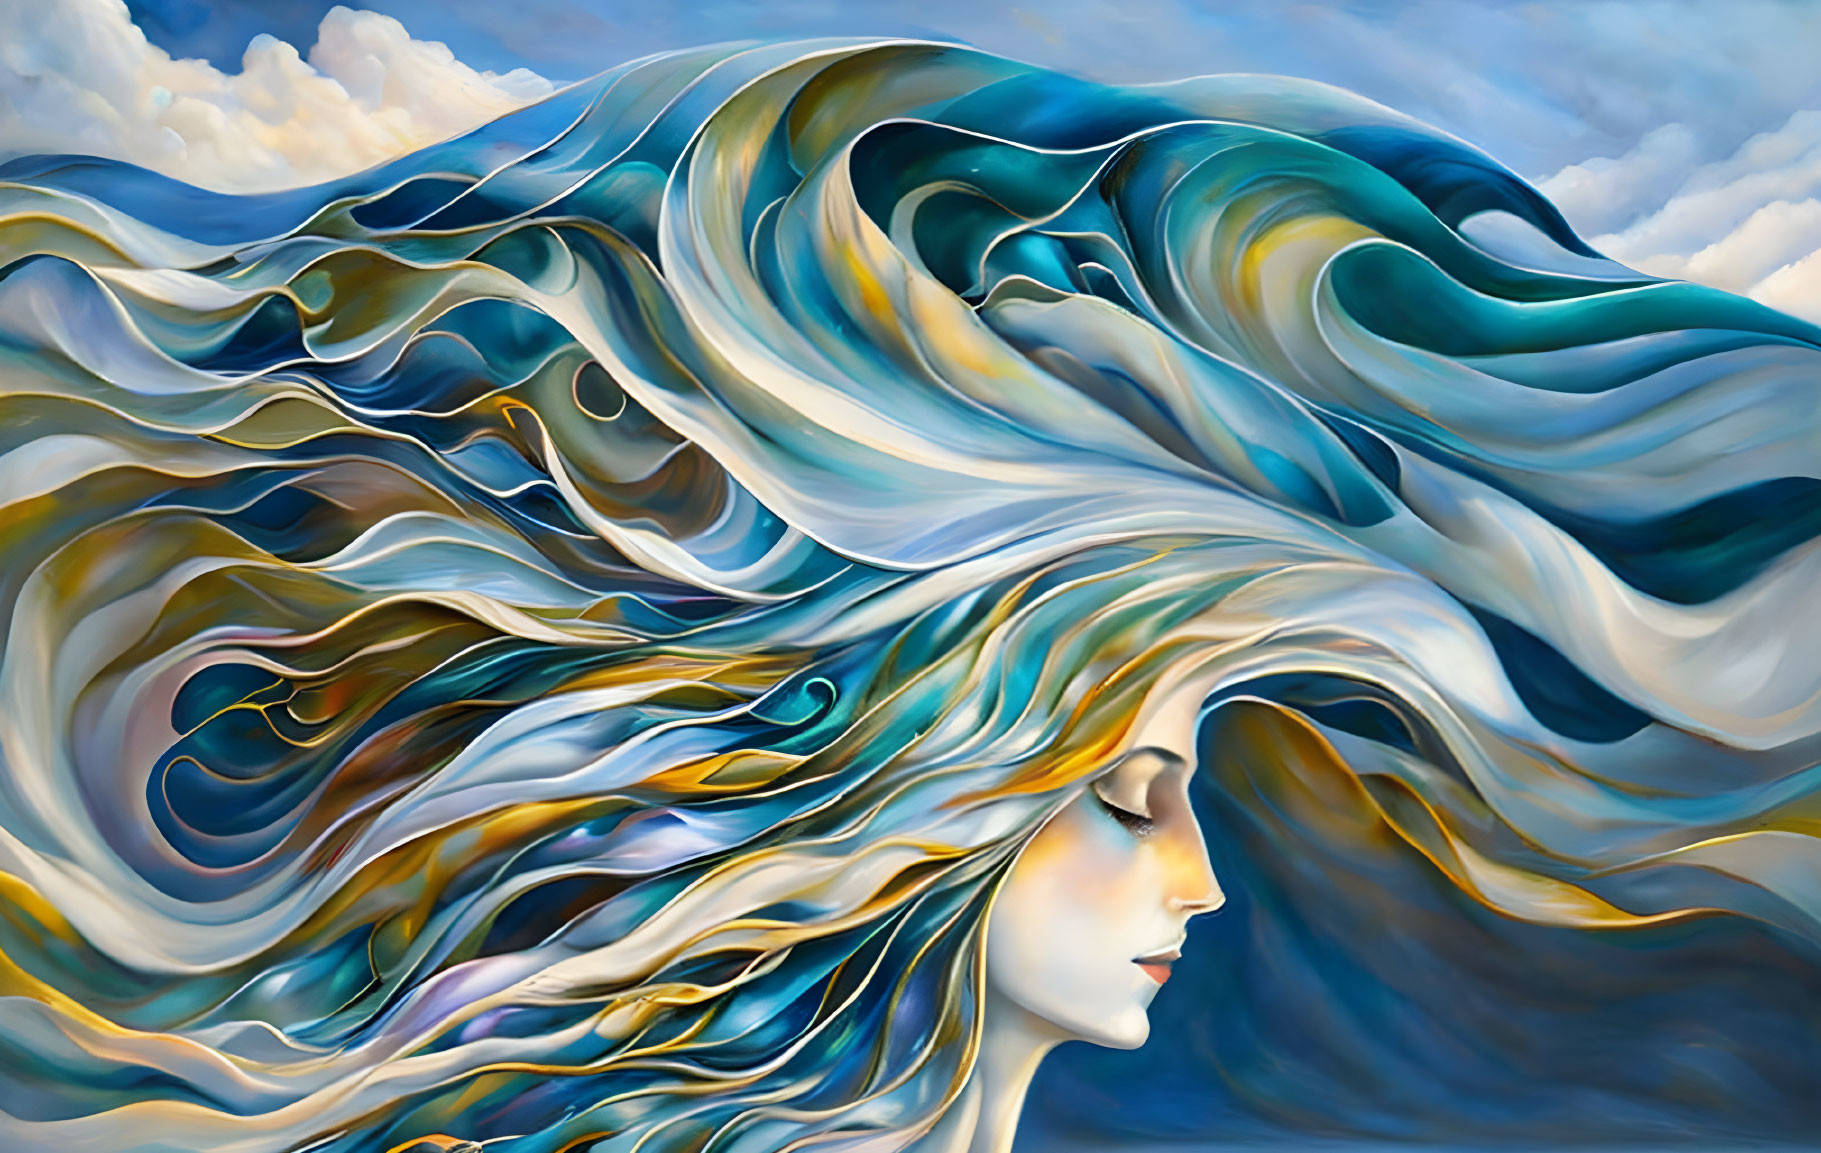 Surreal painting: Woman with flowing hair and stylized waves in blue, gold, and white